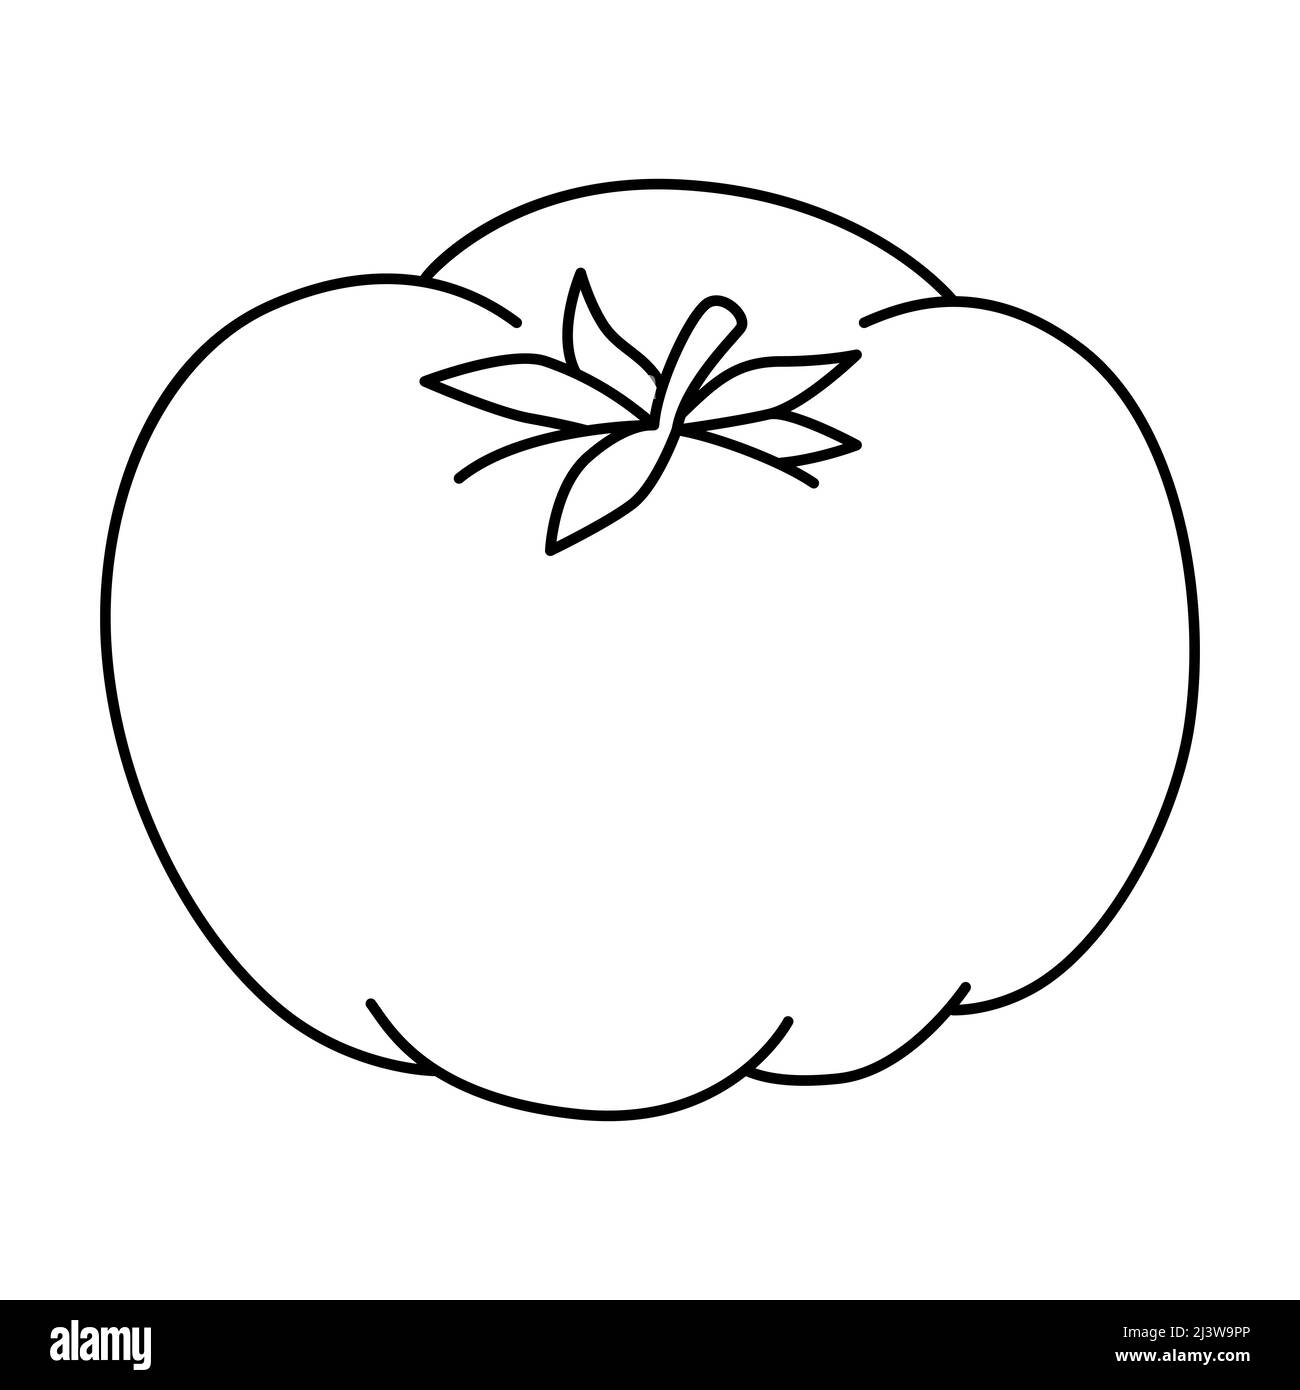 Black and white cartoon vector illustration of tomato for coloring book. Ripe fresh vegetable Stock Vector